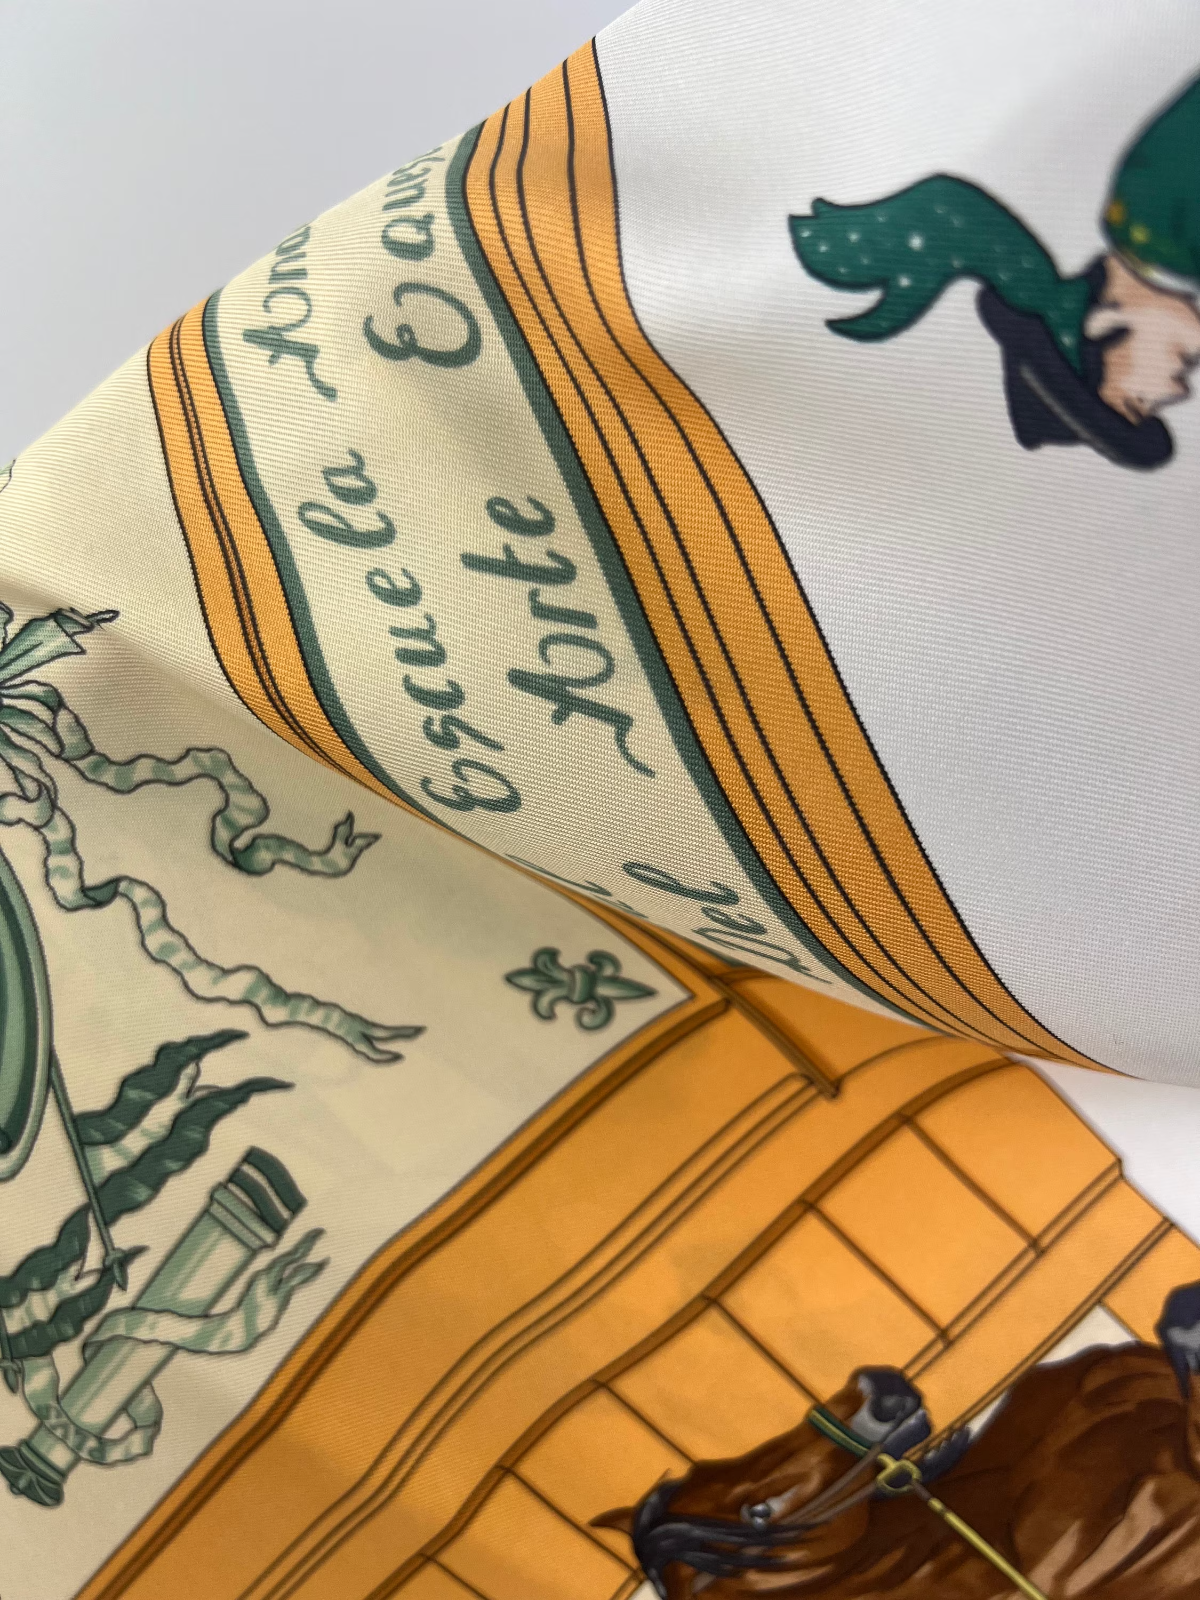 Hermes Scarf Vintage Real Escuela Andaluza Del Arte Ecuestre, Silk scarf, gift for her, Made in france scarf, Silk Scarves, Hermes Carre